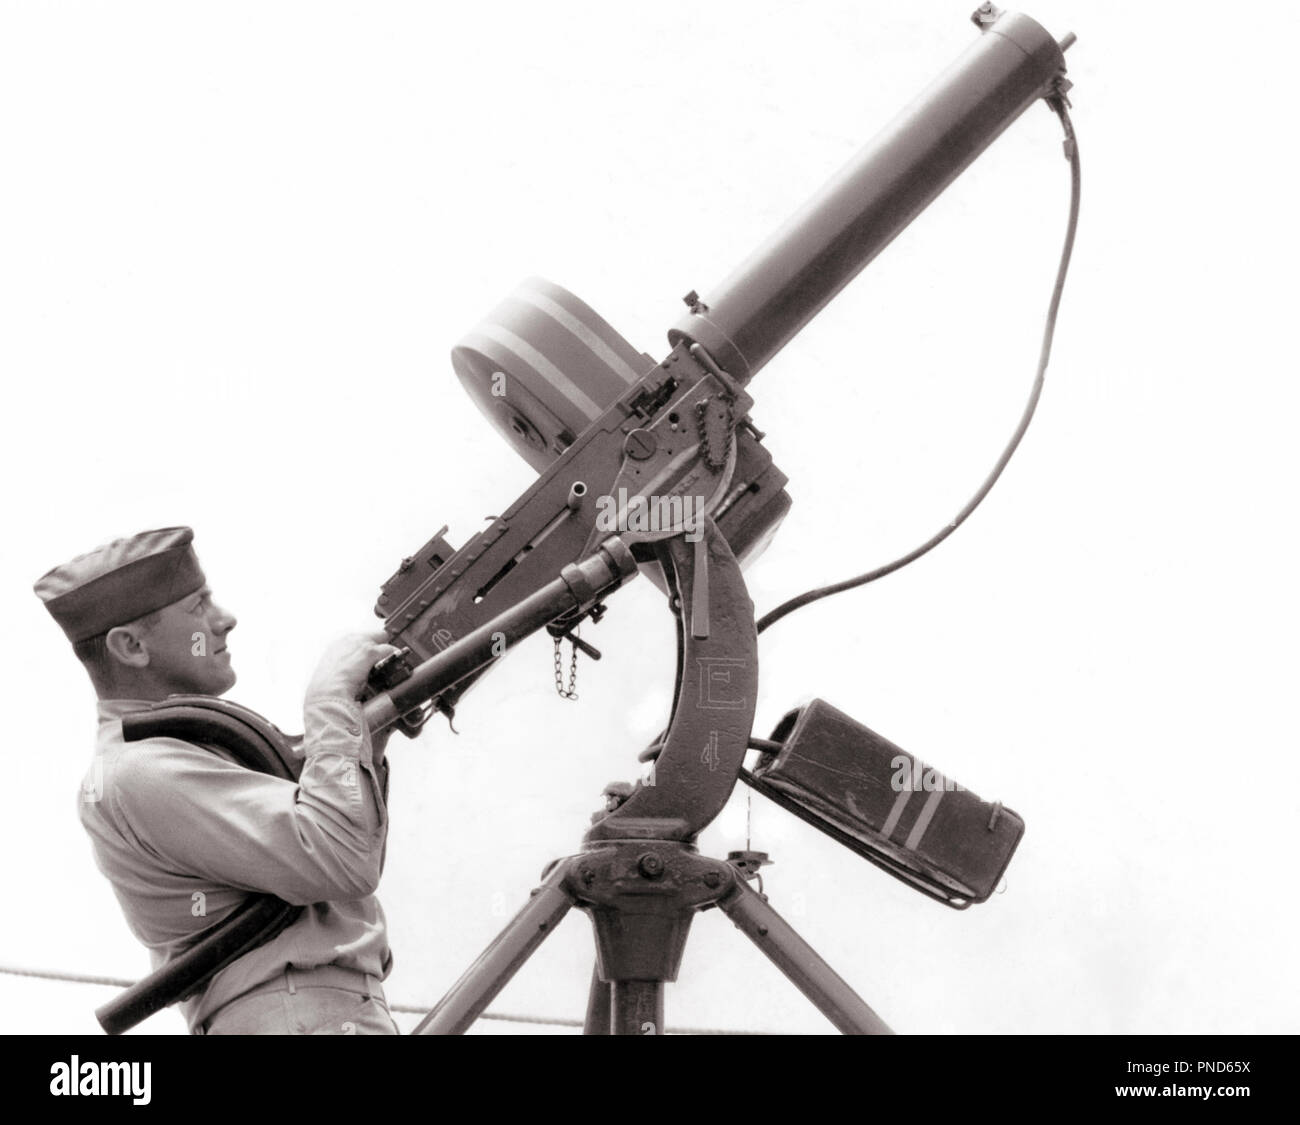 1940s MAN MARINE SOLDIER FIRING BROWNING 50 CALIBER M2 WATER COOLED ANTIAIRCRAFT PEDESTAL MOUNTED MACHINE GUN DURING WORLD WAR 2 - q74993 CPC001 HARS WORLD WAR 2 FIREARM FIREARMS M2 MID-ADULT MID-ADULT MAN MOUNTED YOUNG ADULT MAN BLACK AND WHITE CAUCASIAN ETHNICITY OLD FASHIONED Stock Photo